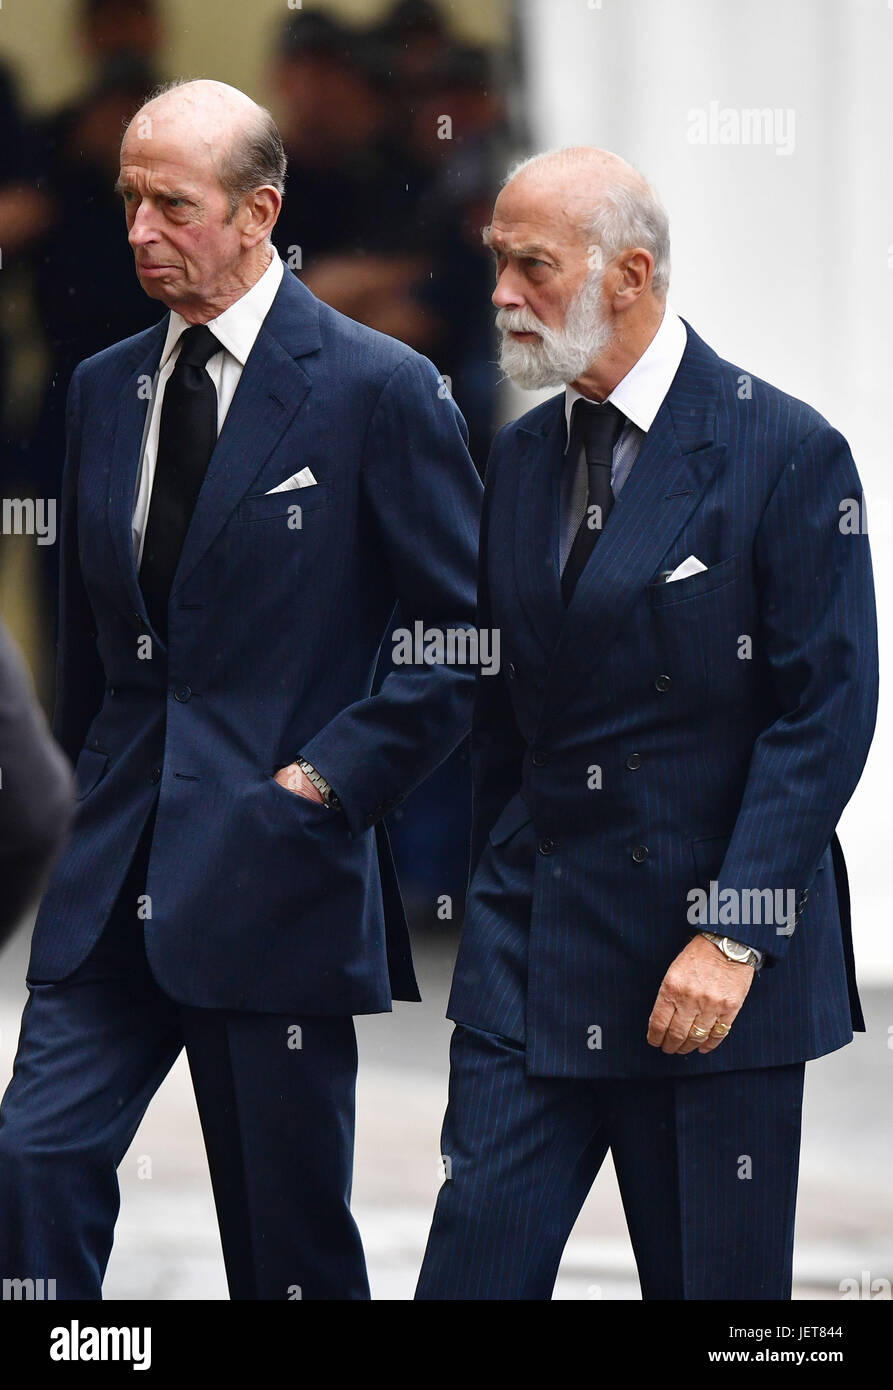 The Duke of Kent (left) and Prince Michael of Kent arriving at the funeral of Countess Mountbatten of Burma's at St Paul's Church, Knightsbridge, London. Stock Photo